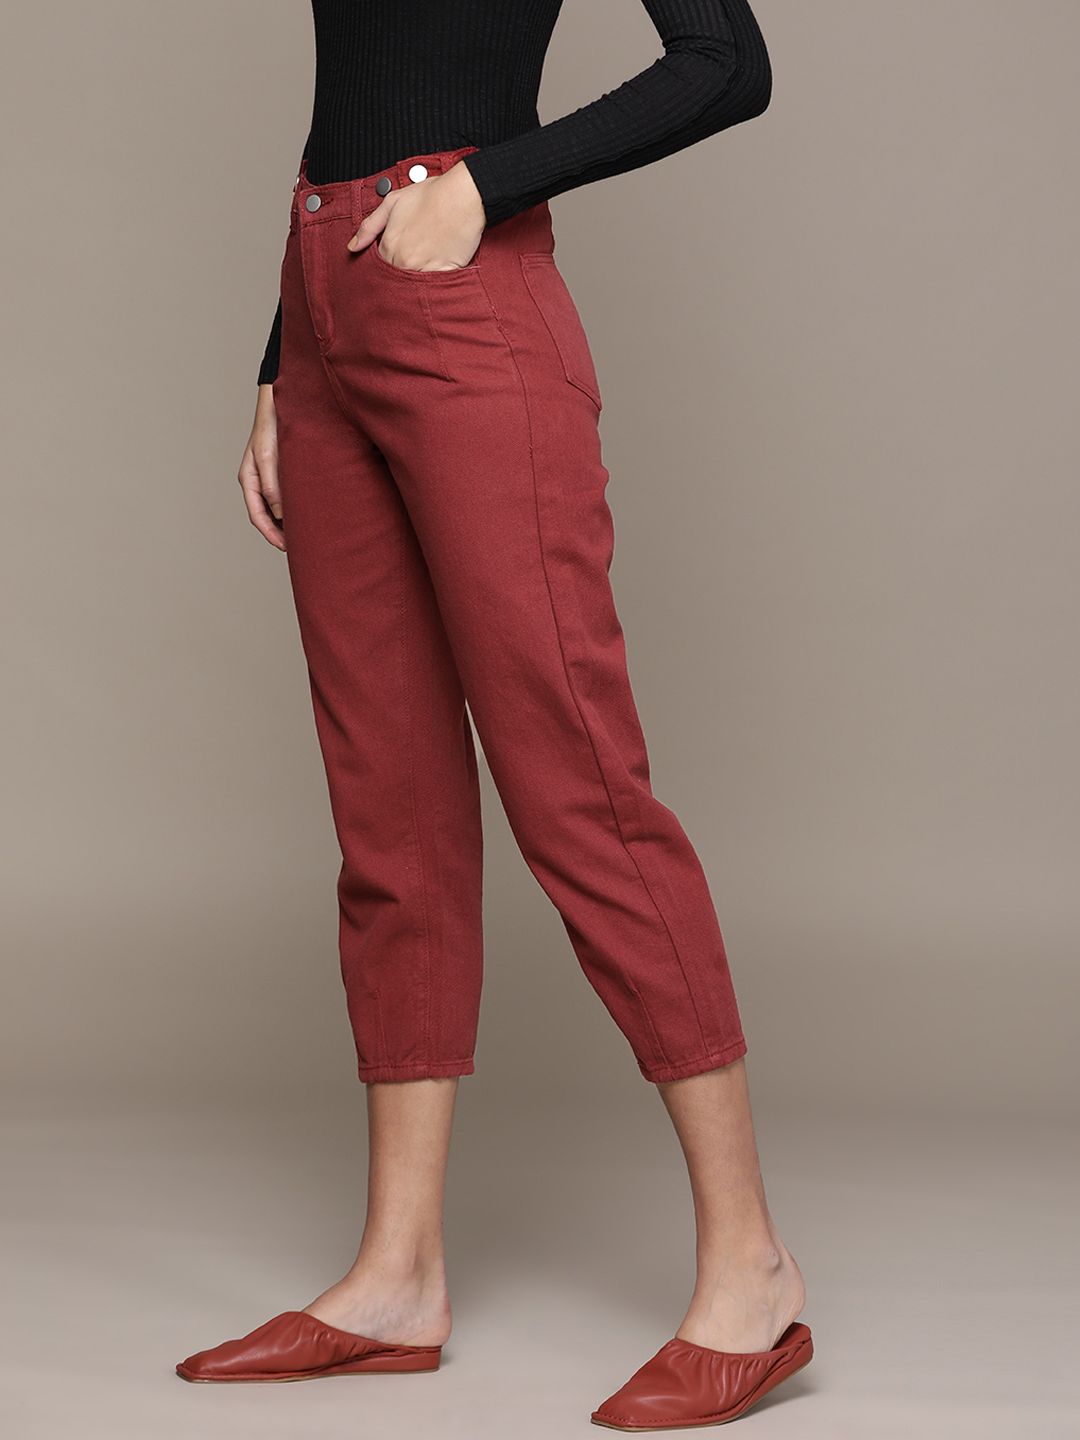 URBANIC Women Red Cotton Solid Cropped Jeans Price in India